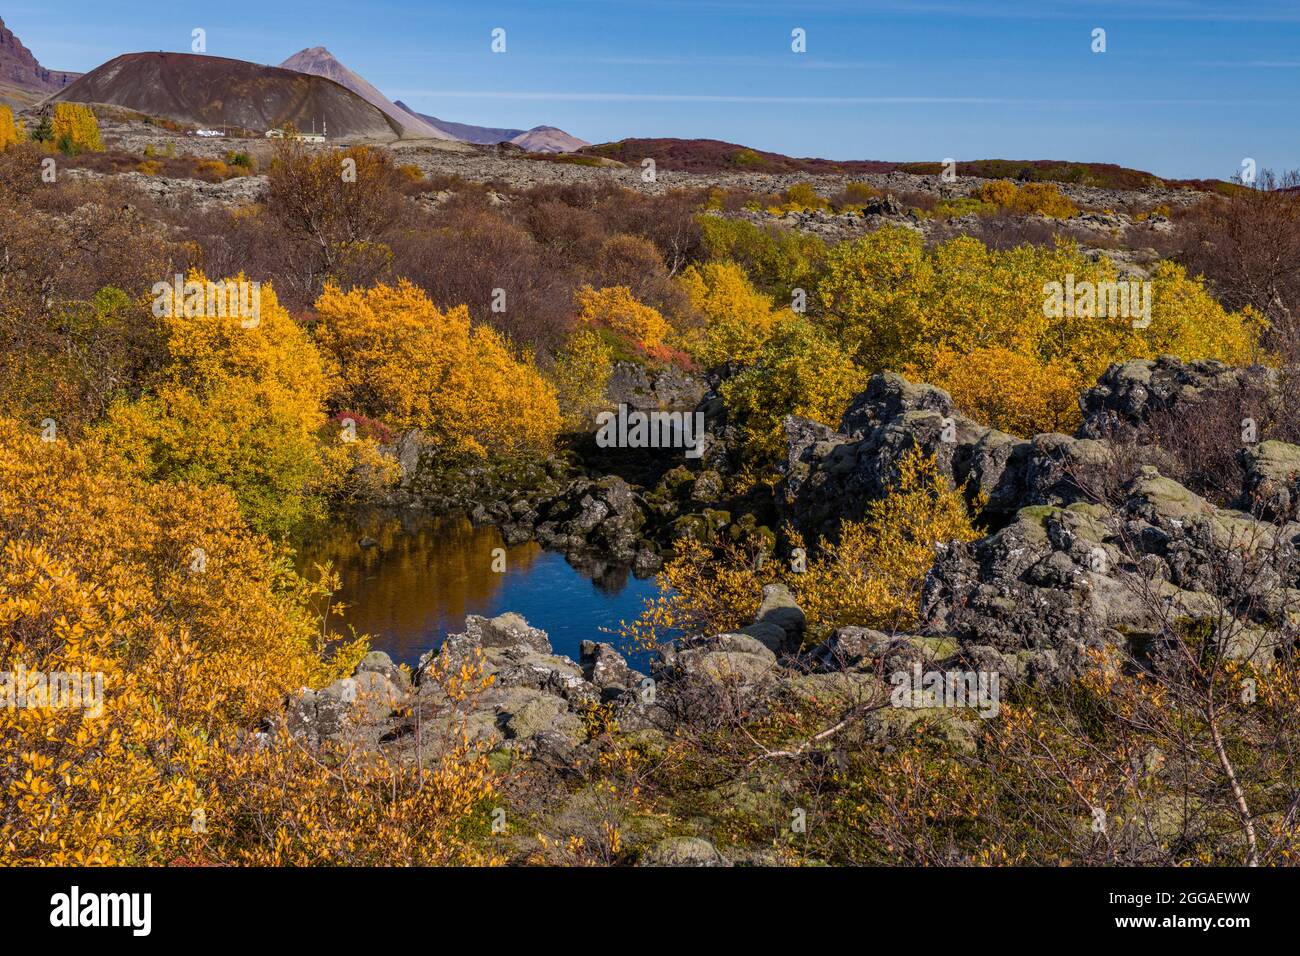 Lava Rocks and blue pools at Bifrost off the A1 road that circumnavigates Iceland - in October Stock Photo